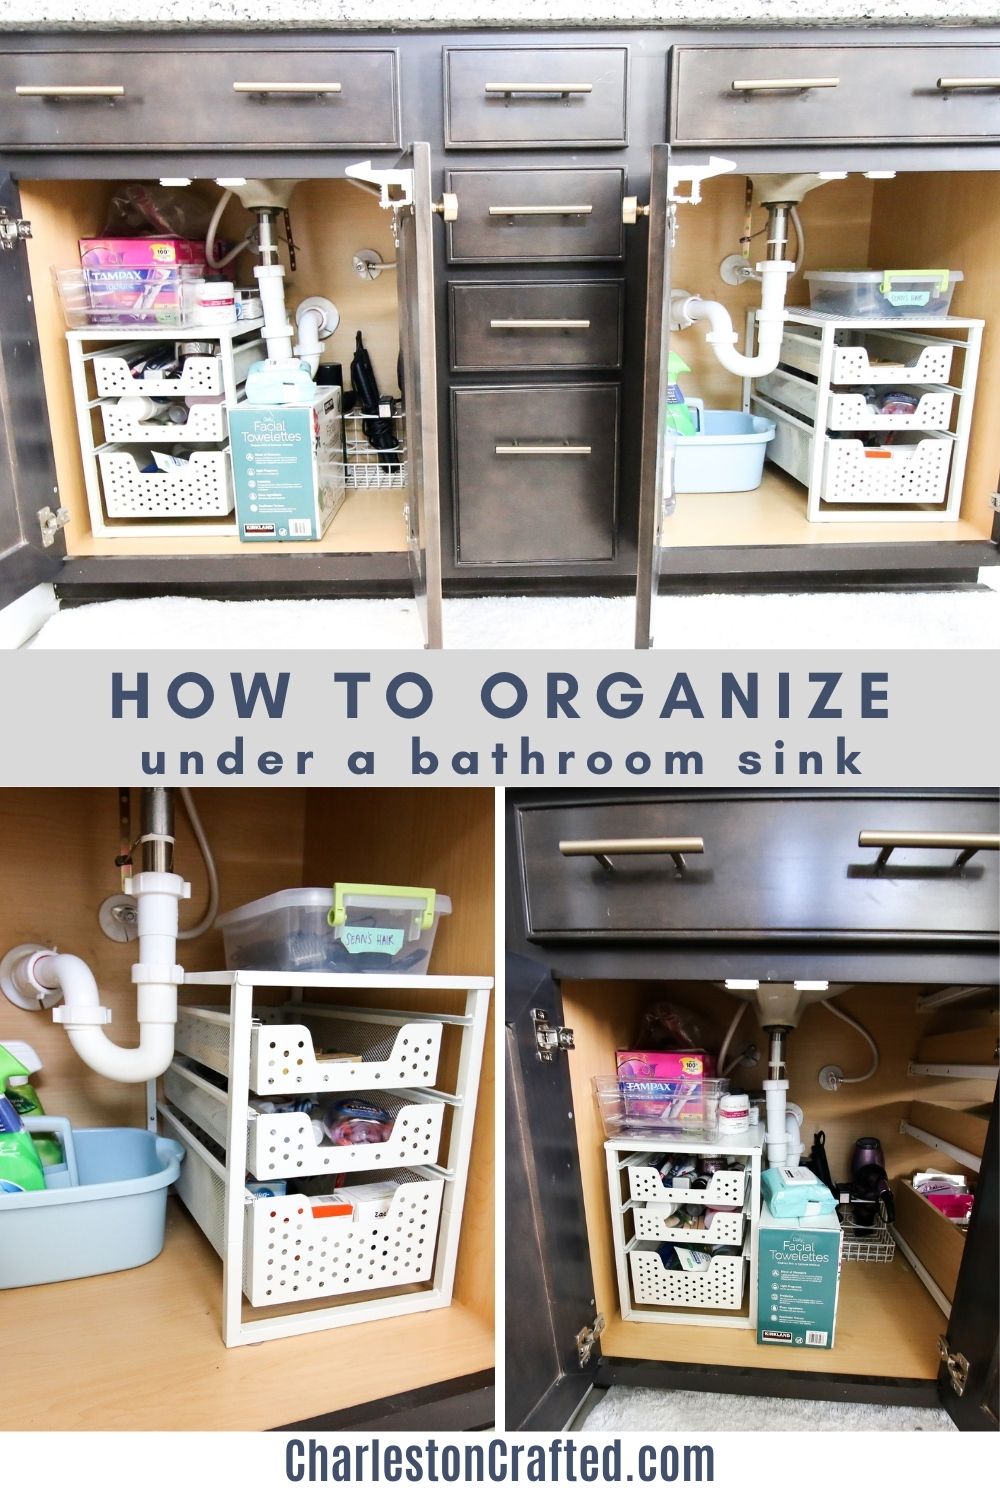 https://www.charlestoncrafted.com/wp-content/uploads/2022/01/how-to-organize-under-a-bathroom-sink.jpg